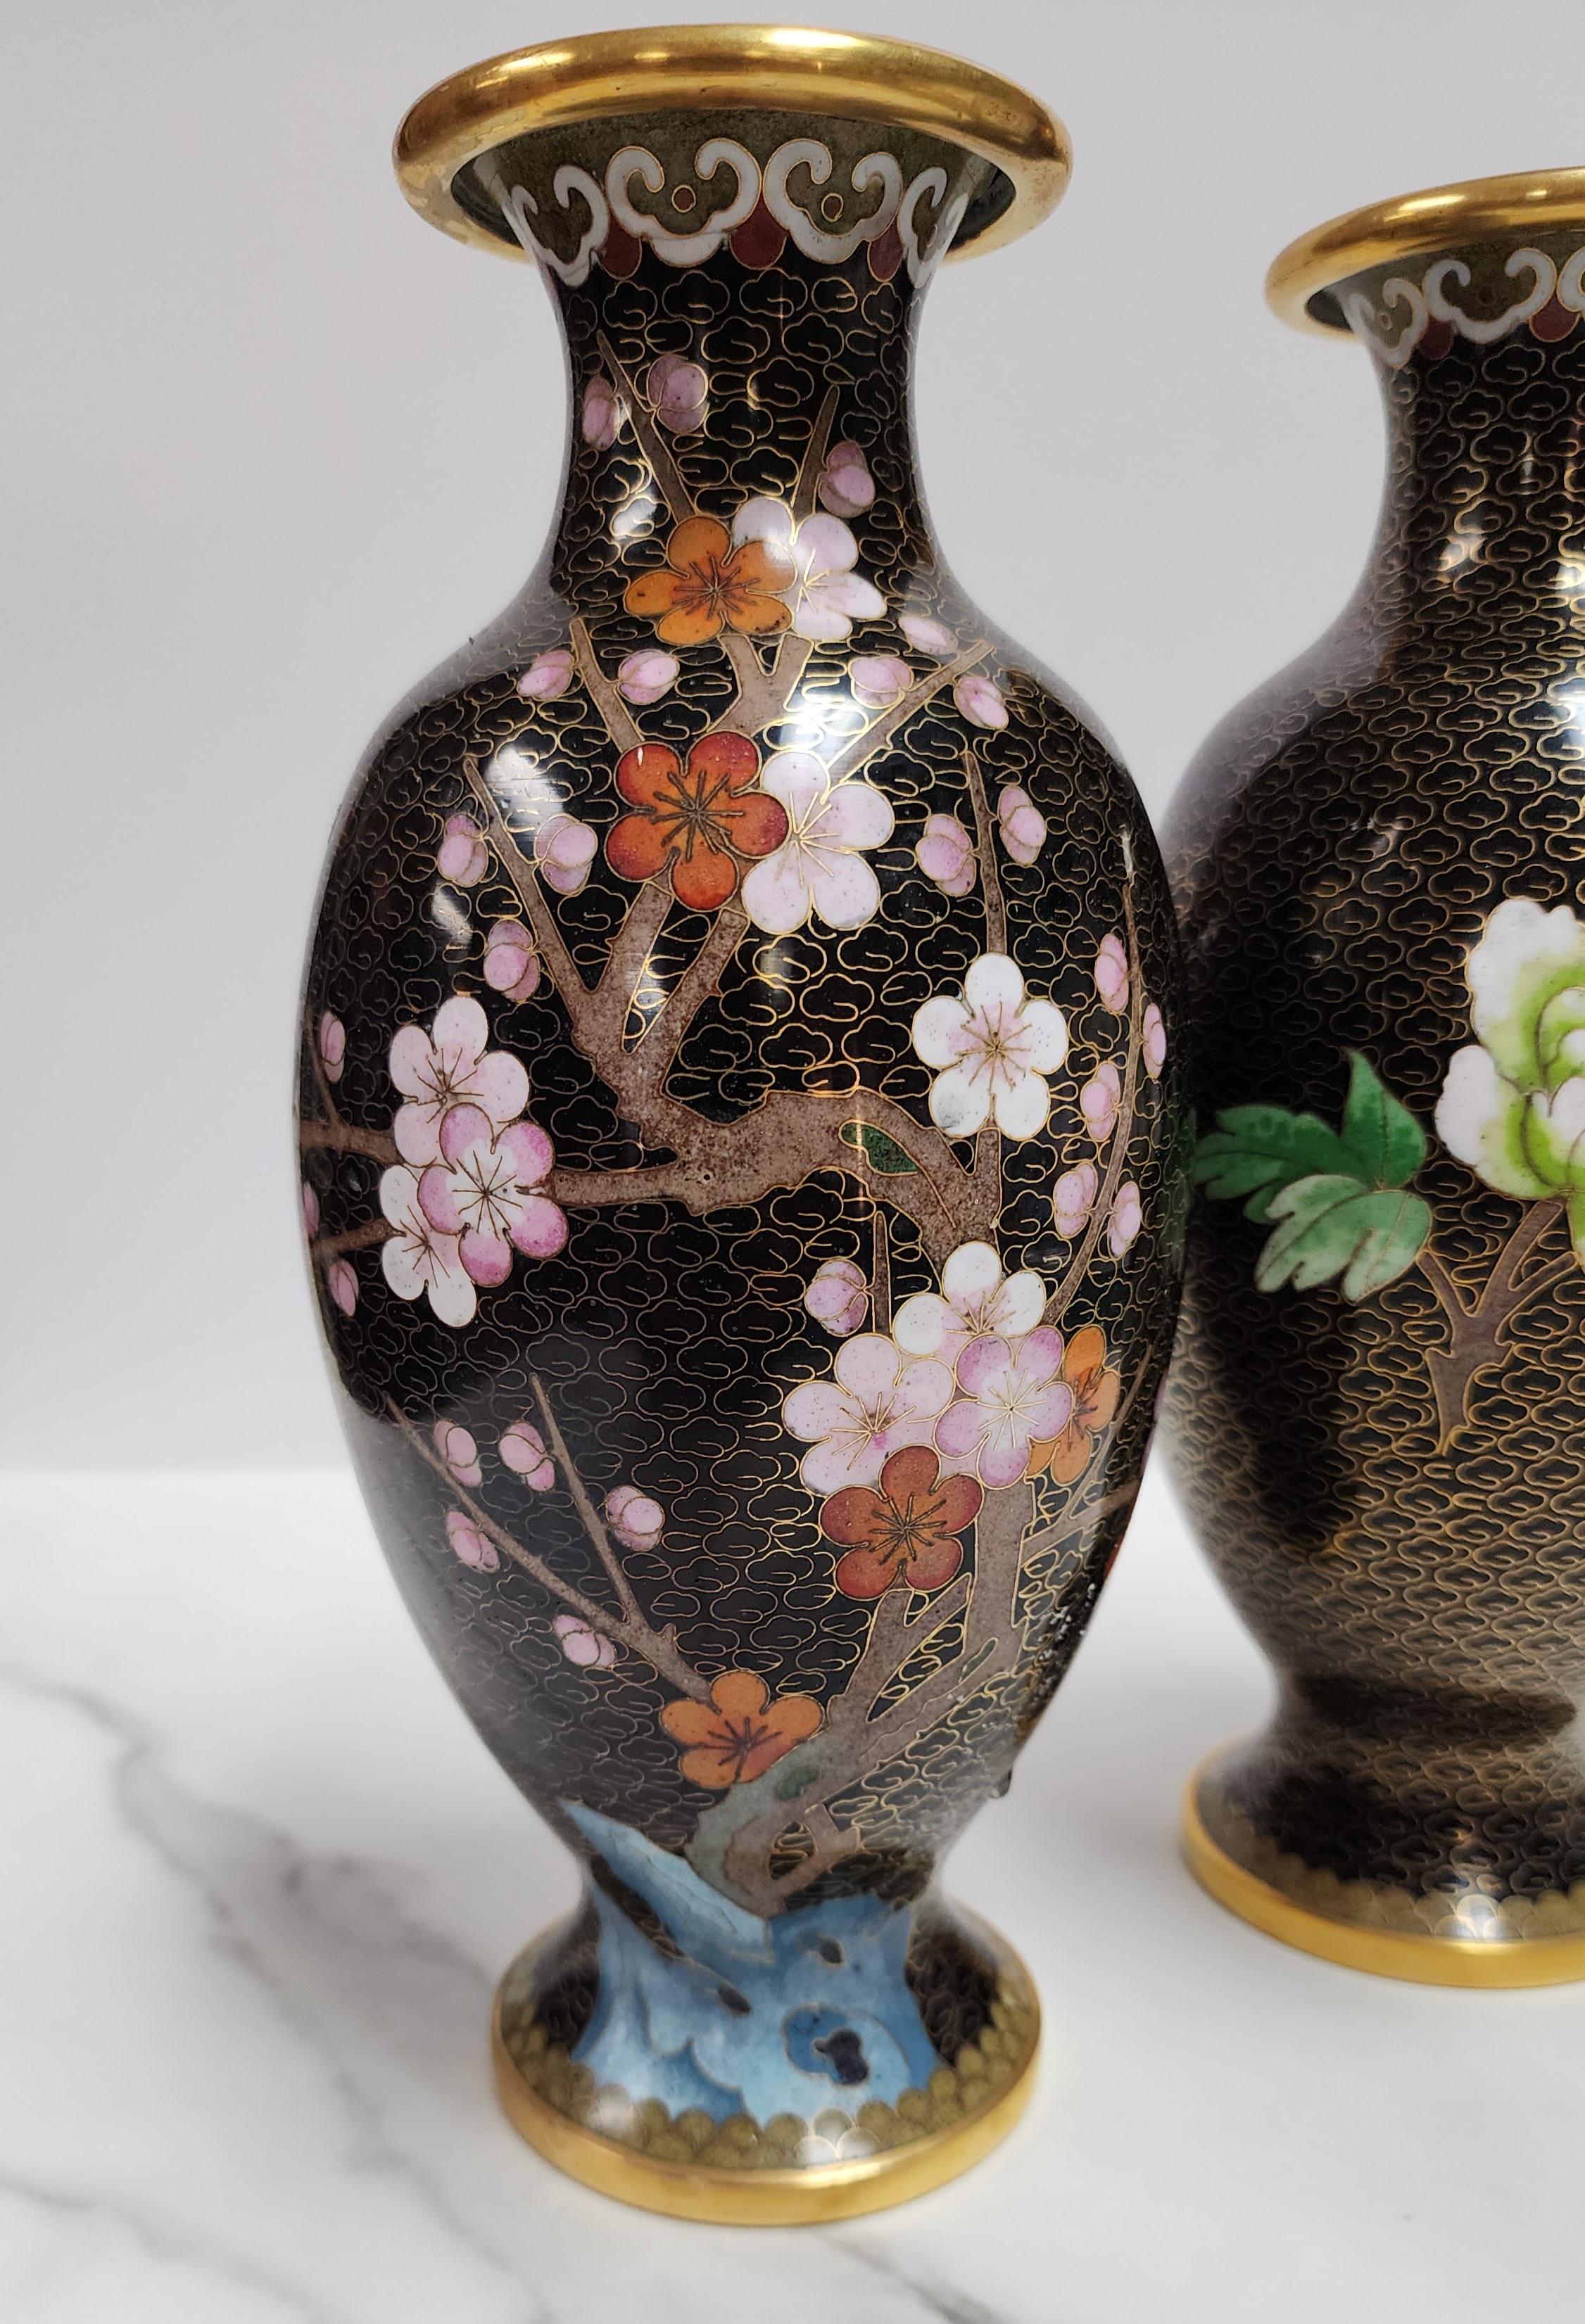 Pair of Mirrored Chinese Cloisonne Enamel Vase with Flower and Bird Motif For Sale 1